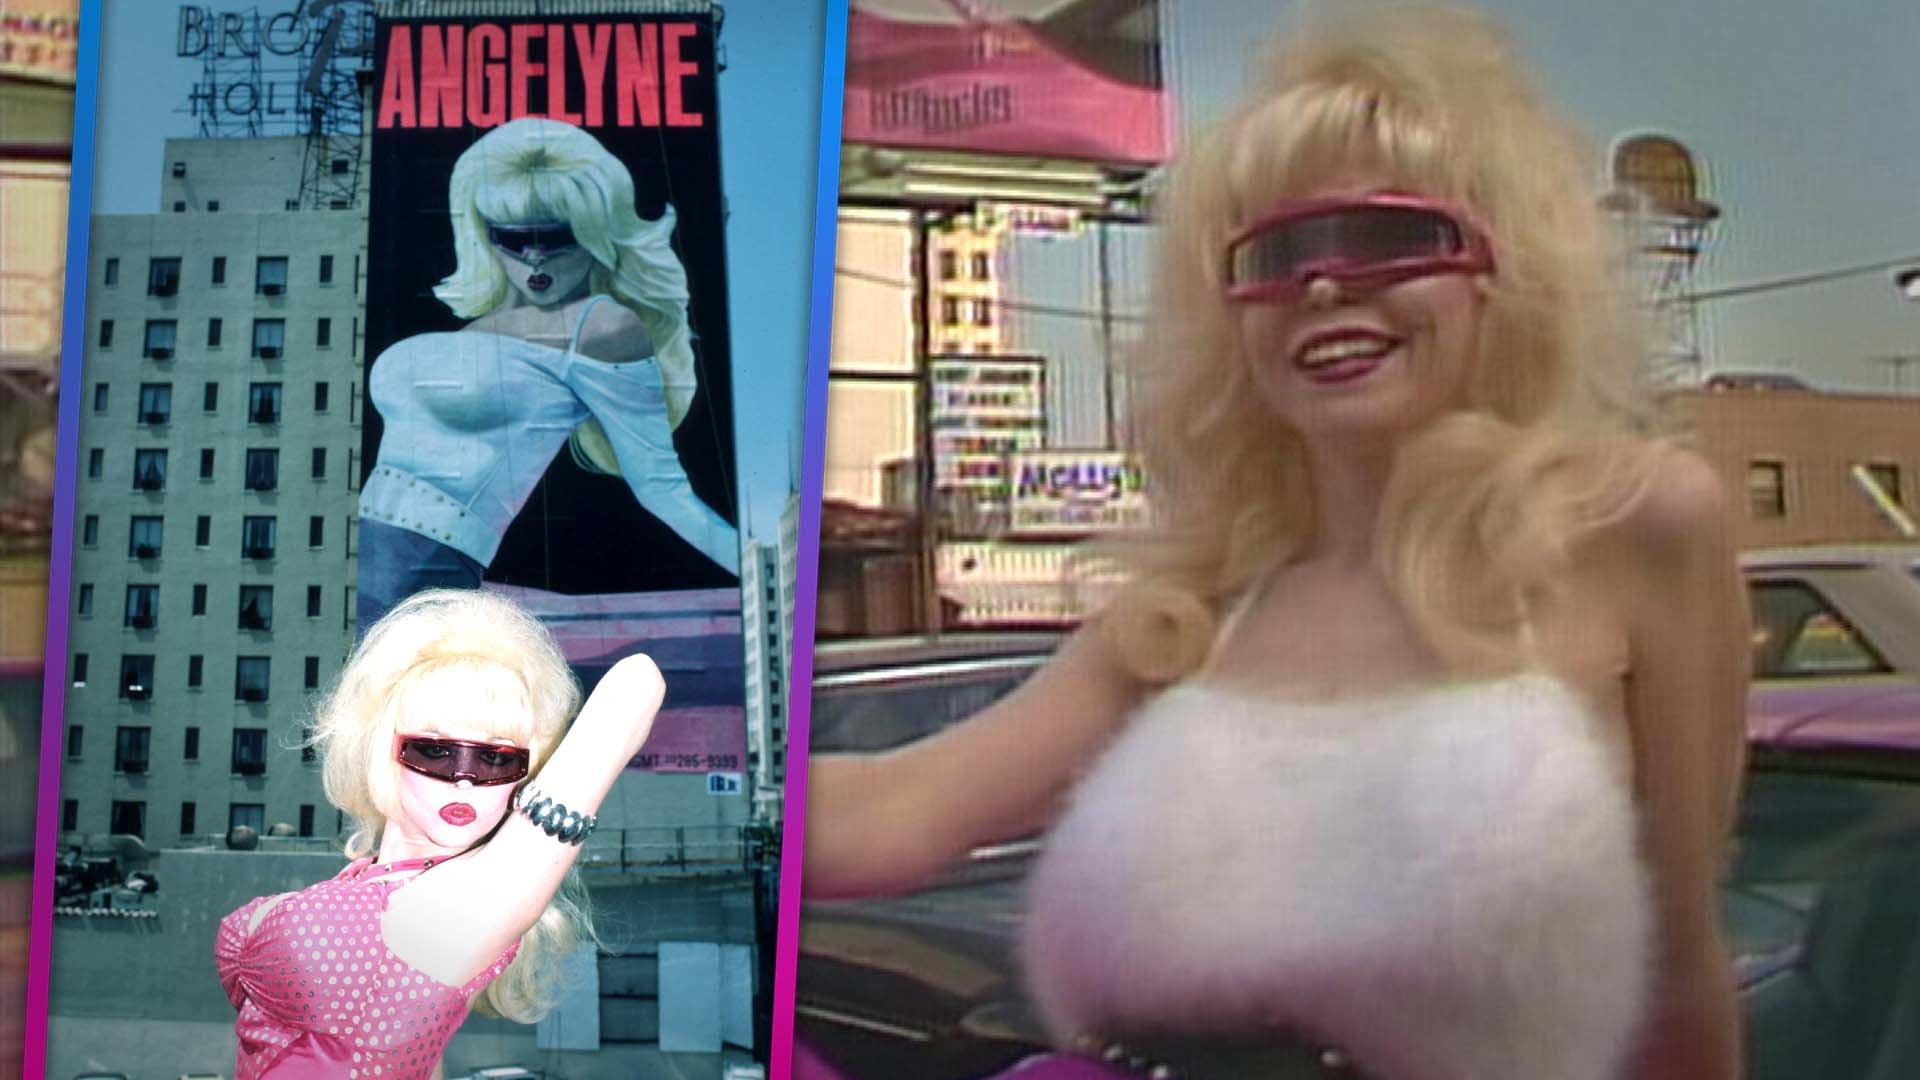 Watch Angelyne in Rare Interviews About Her Iconic L.A. Billboards (Flashback)